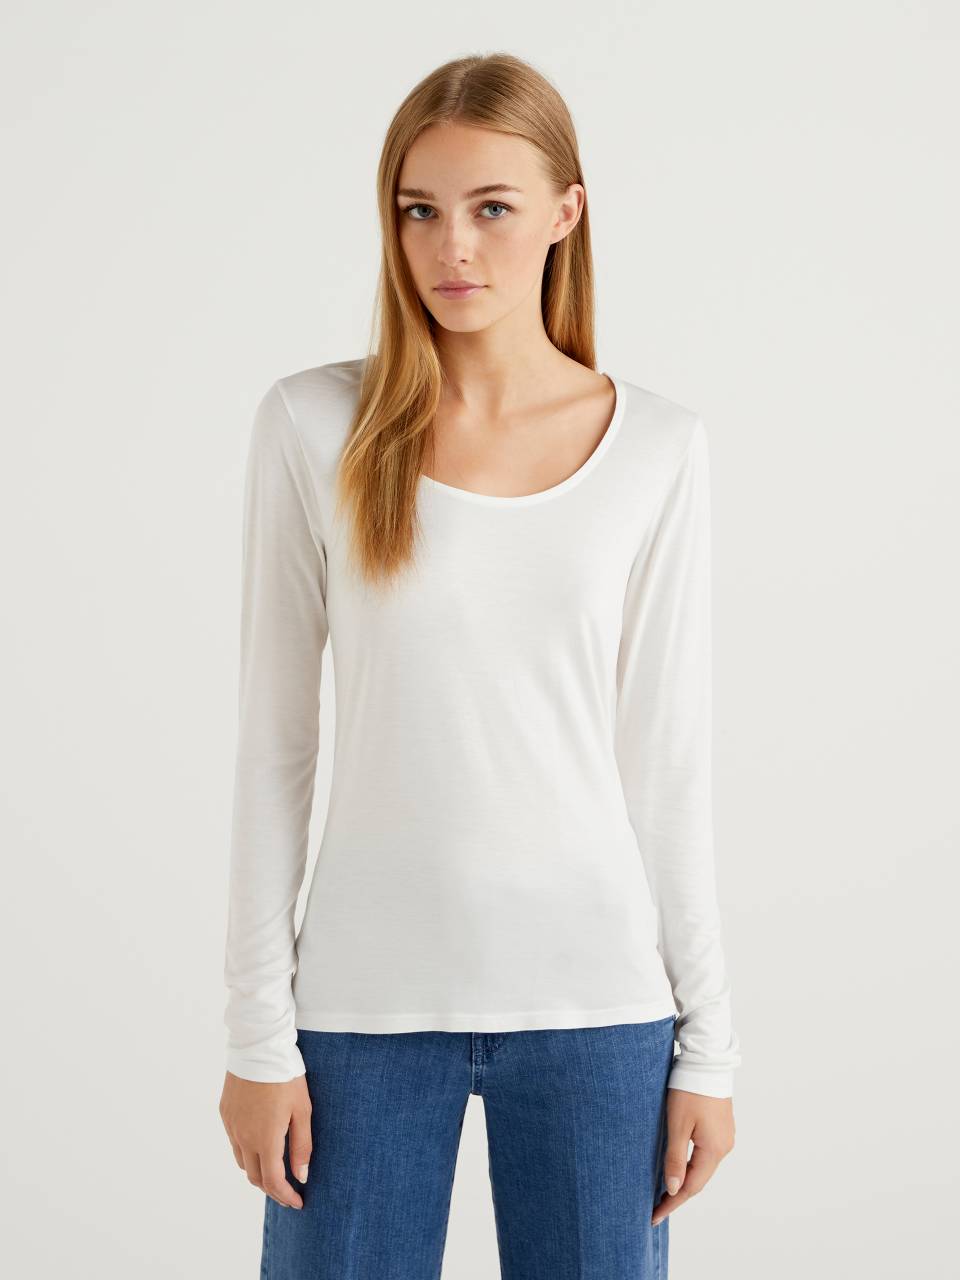 Benetton T-shirt in sustainable stretch viscose. 1